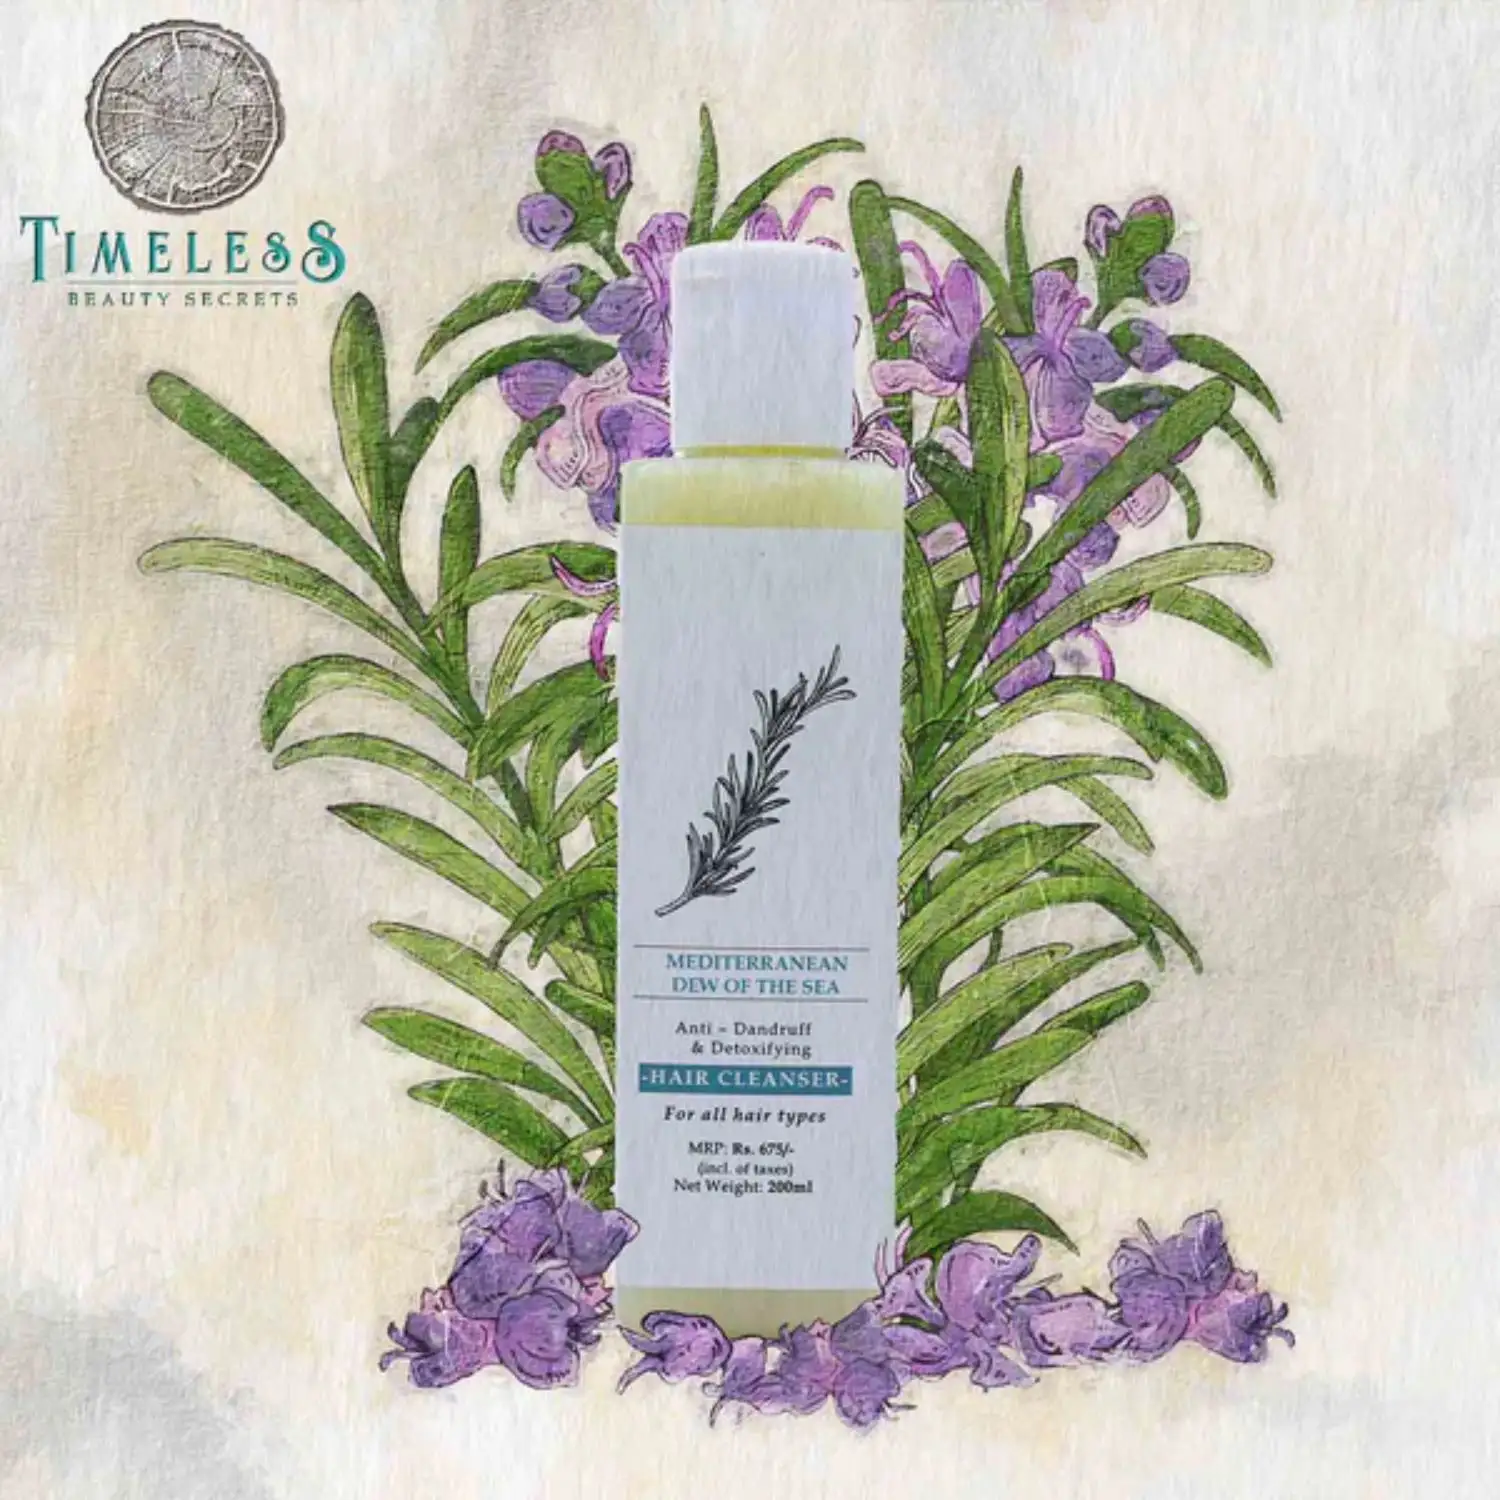 Timeless Beauty Secrets Mediterranean Dew Of The Sea Anti- Dandruff And Detoxifying Natural Hair Cleanser For All Hair Types